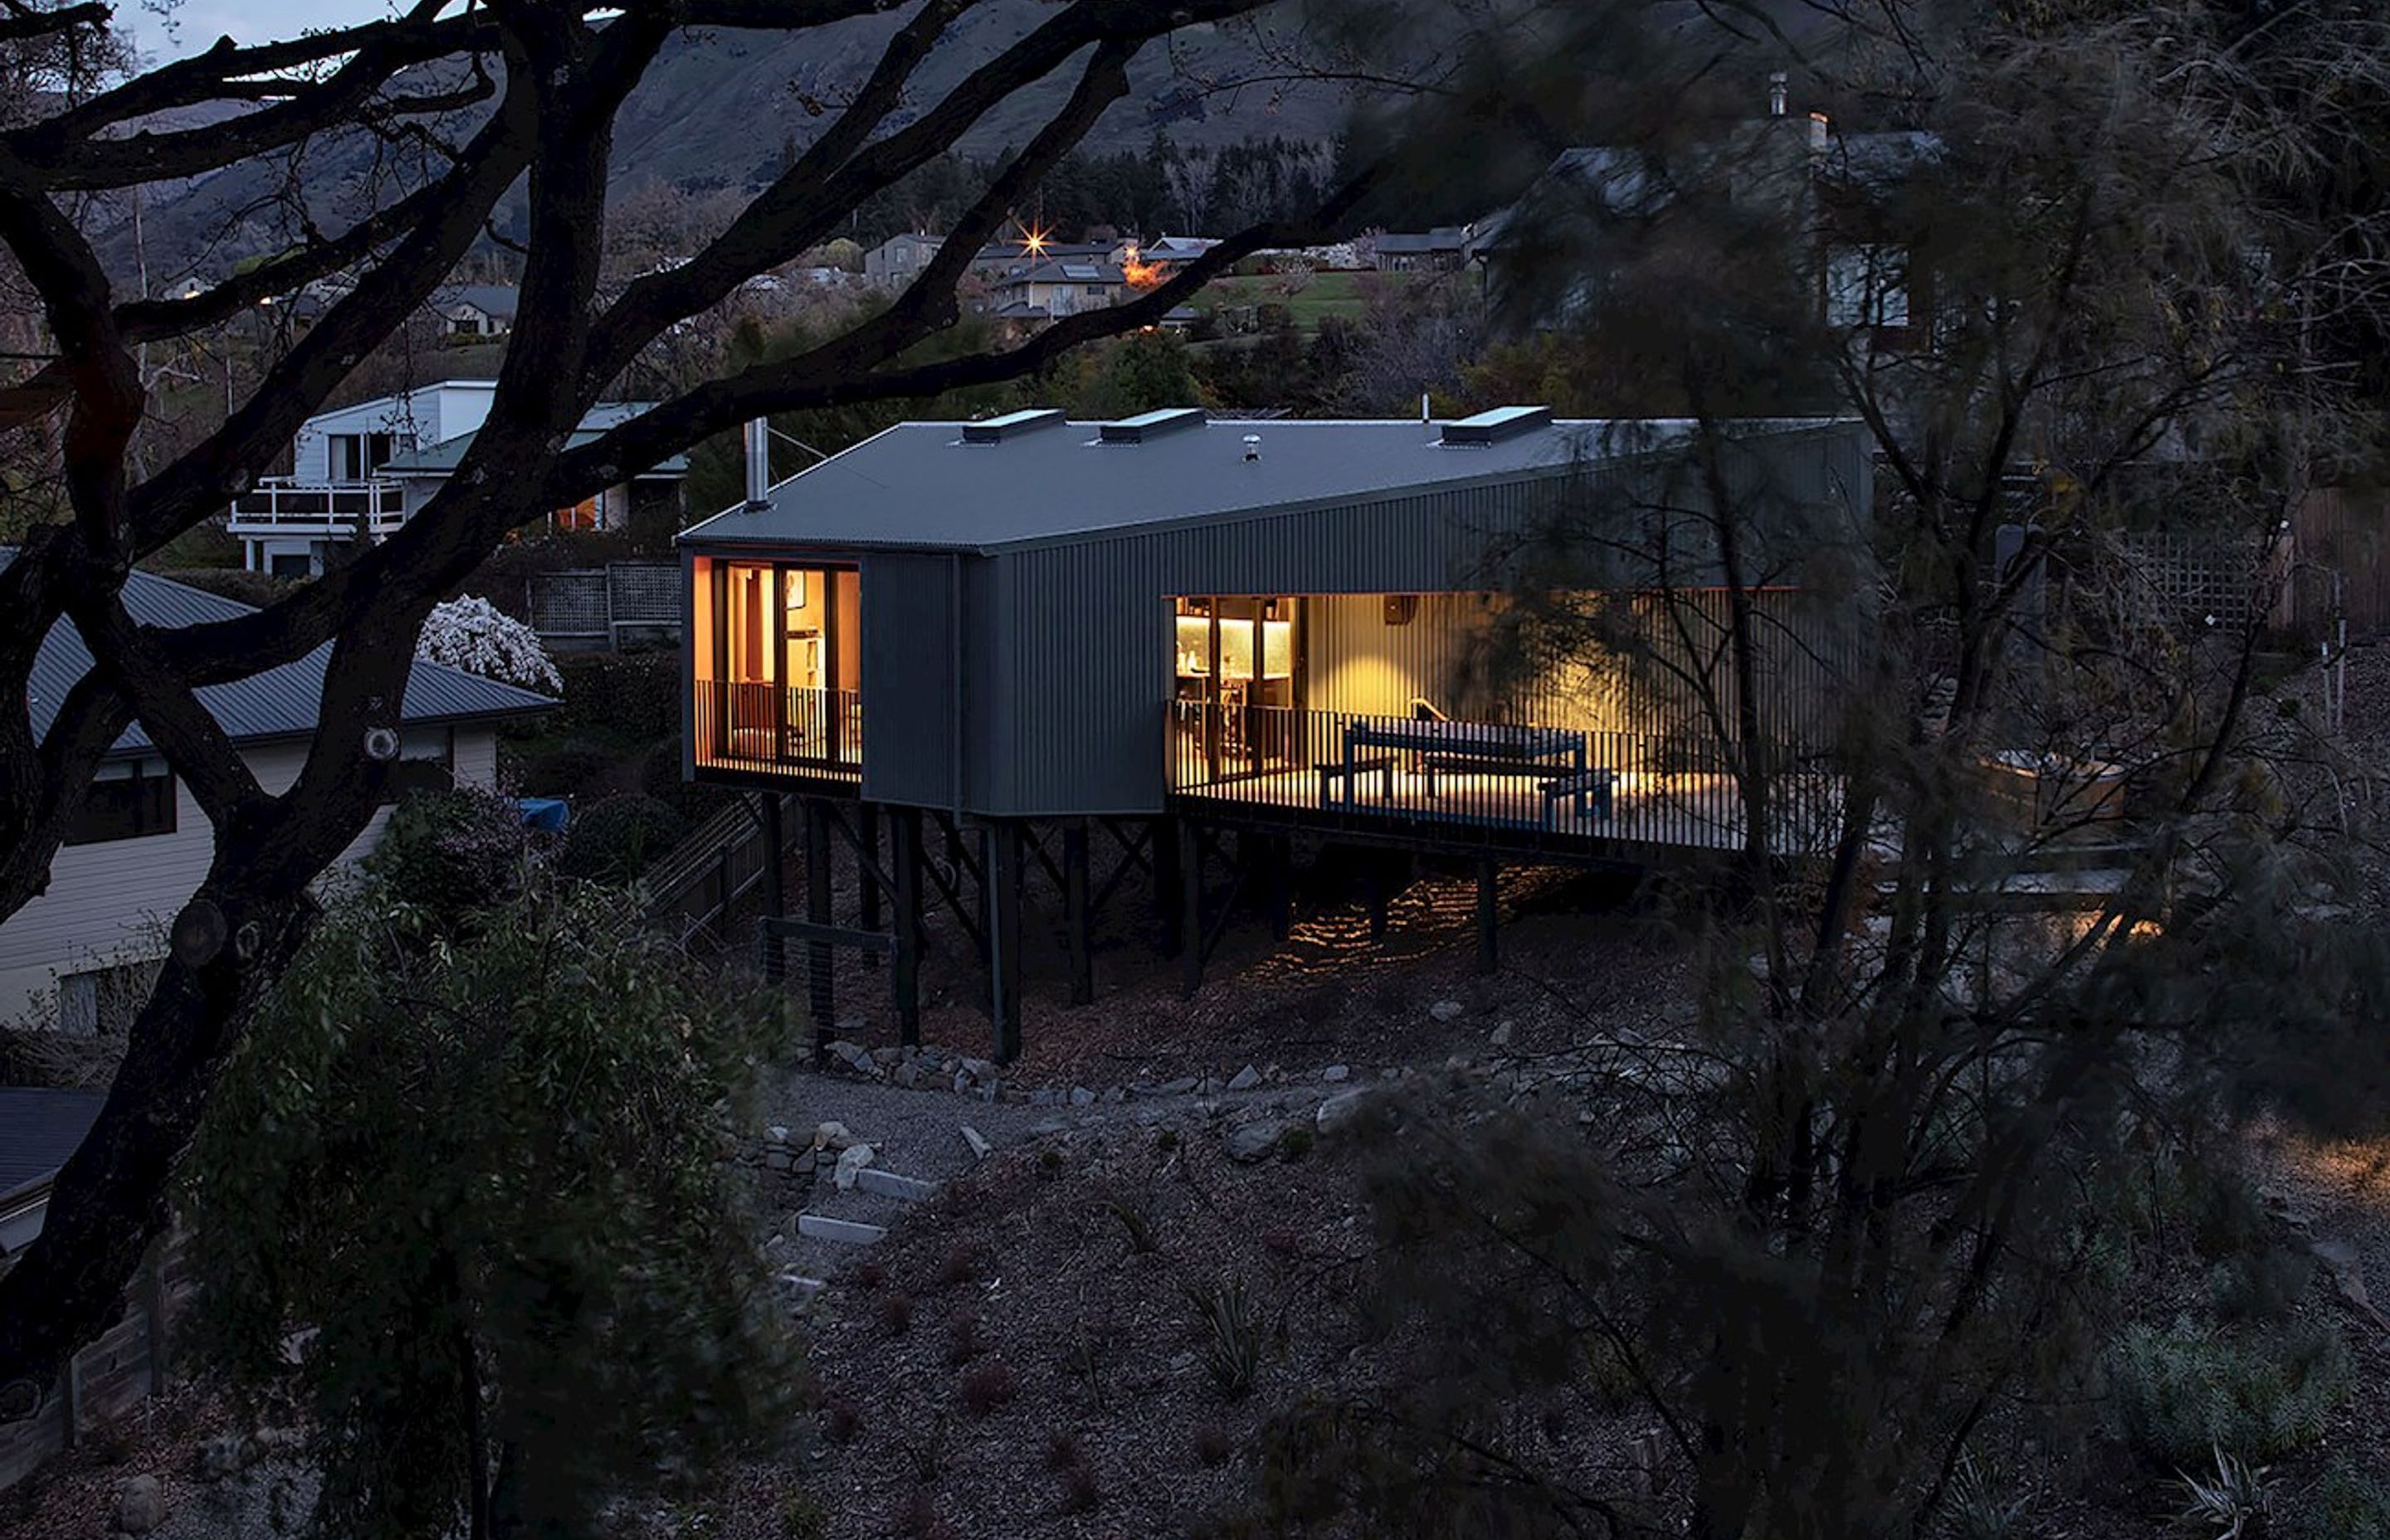 On a very steep site in Wanaka, this modest holiday home is elevated up on poles, like a kea bird perched in the trees.